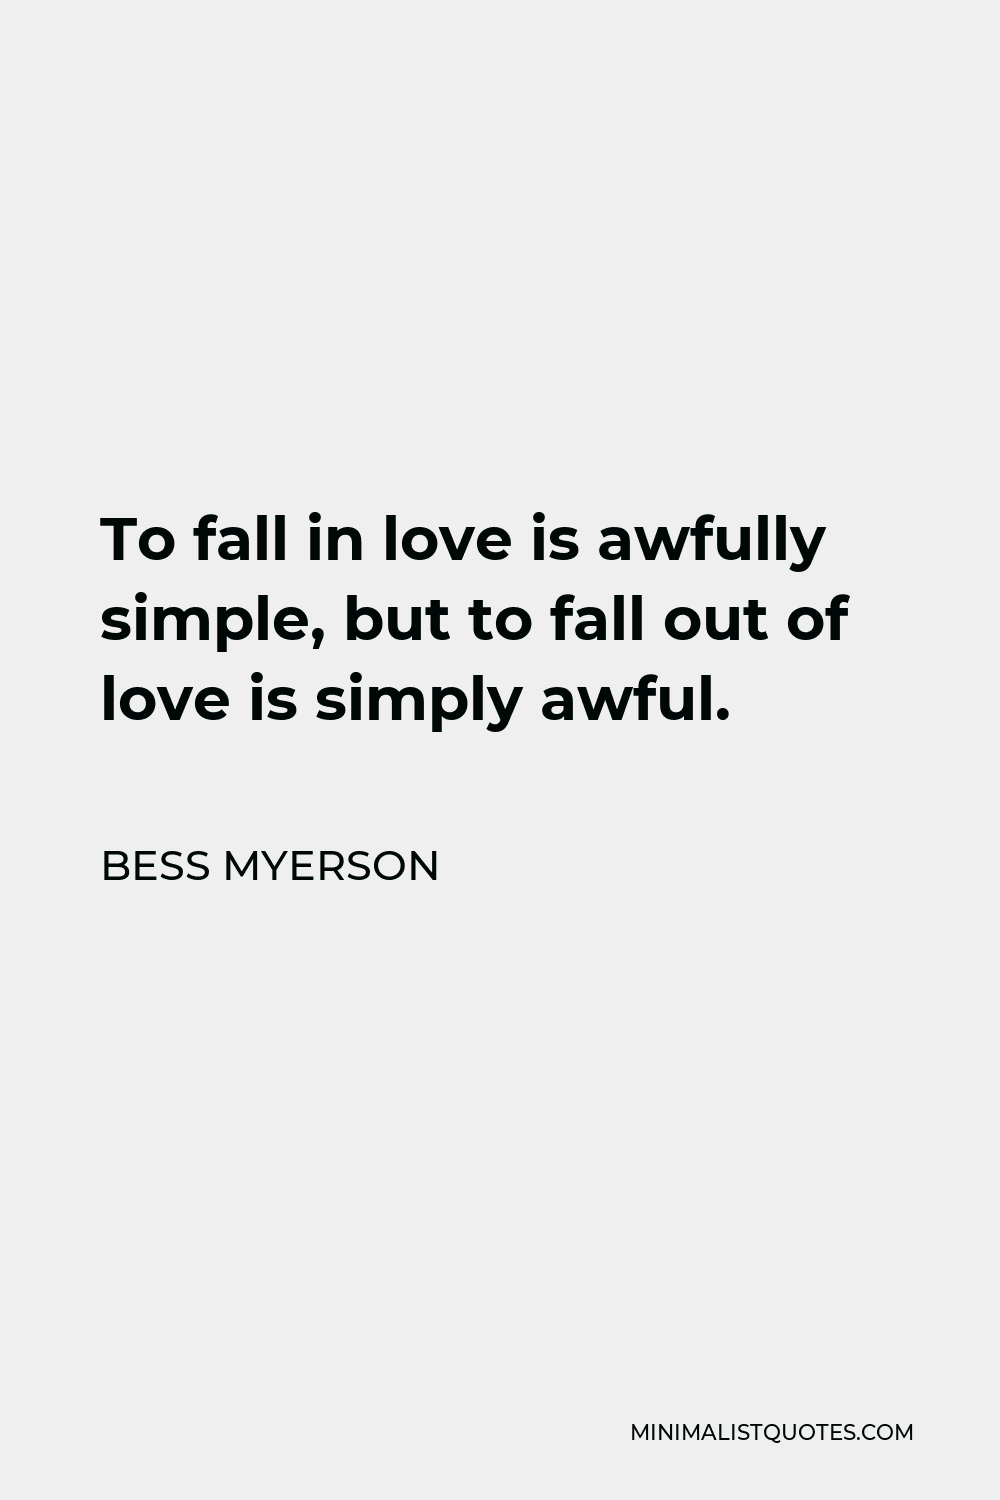 Bess Myerson Quote - To fall in love is awfully simple, but to fall out of love is simply awful.